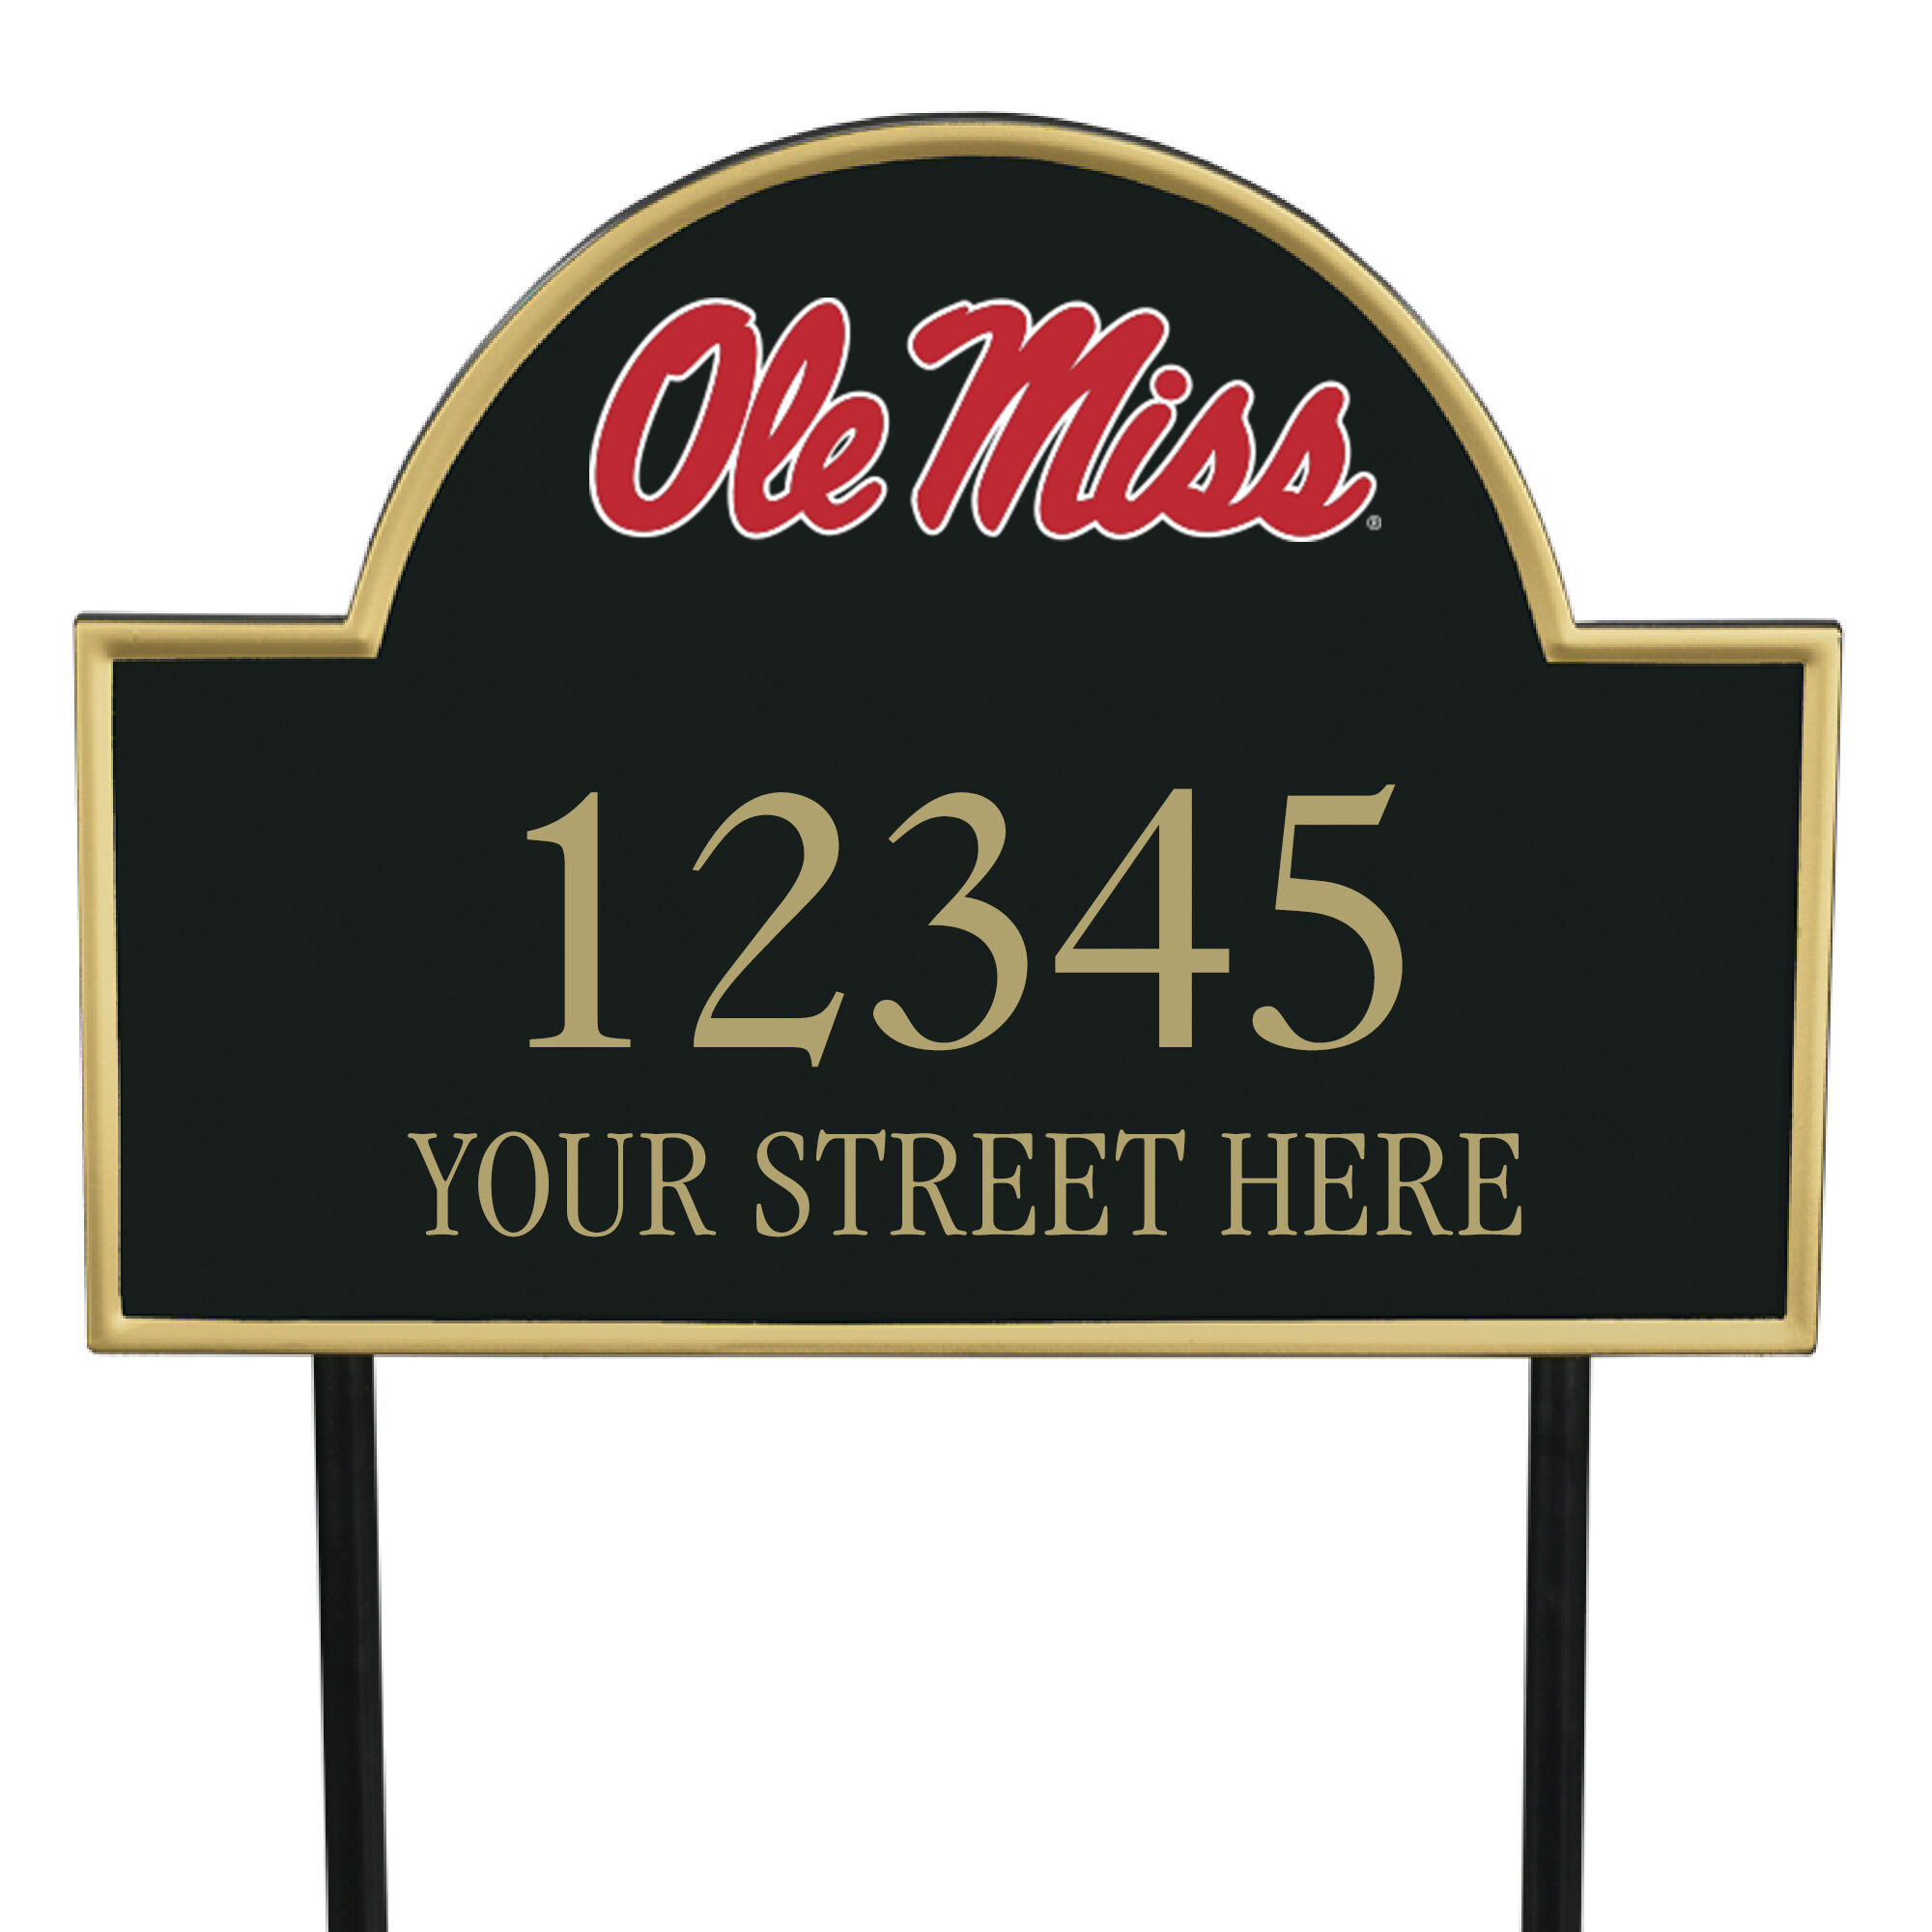 The College Personalized Address Plaque 5716 0384 b Ole Miss